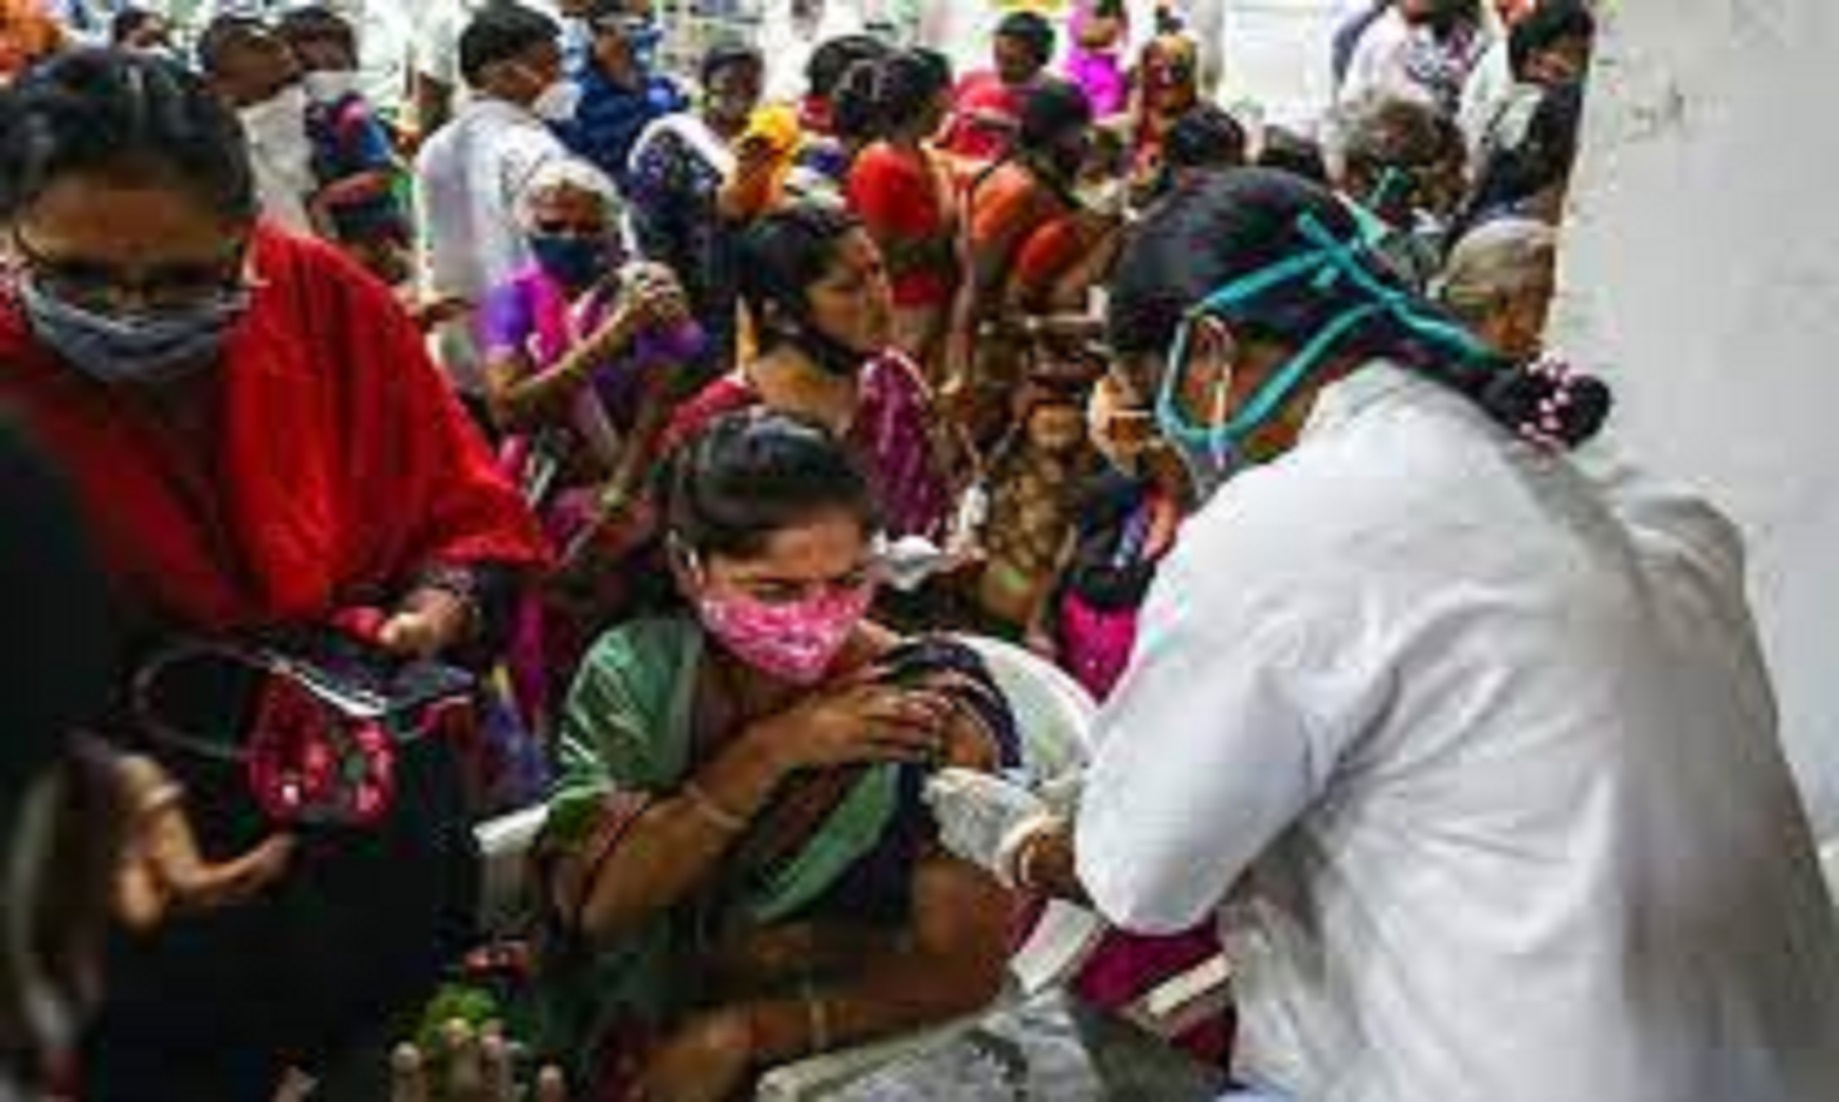 COVID-19 Incidence Rises In India As Nearly 80,000 New Cases Recorded In A Week